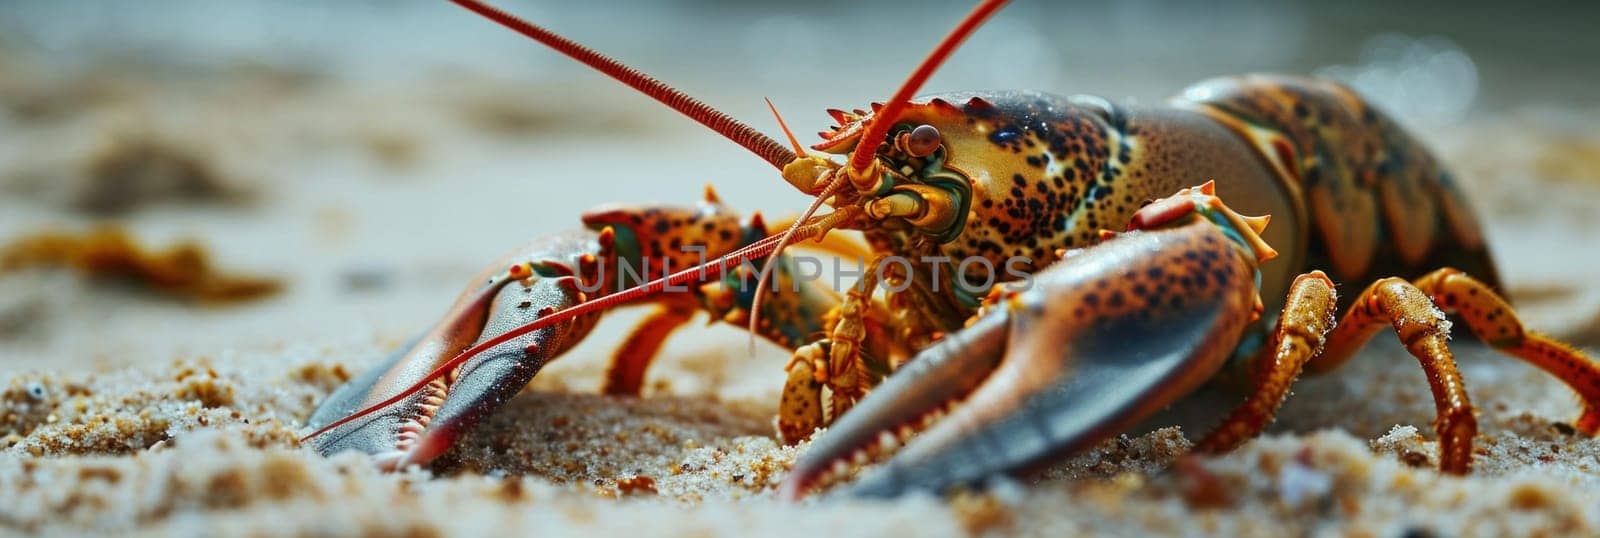 A lobster with large claws and a red tail is on the sand, AI by starush